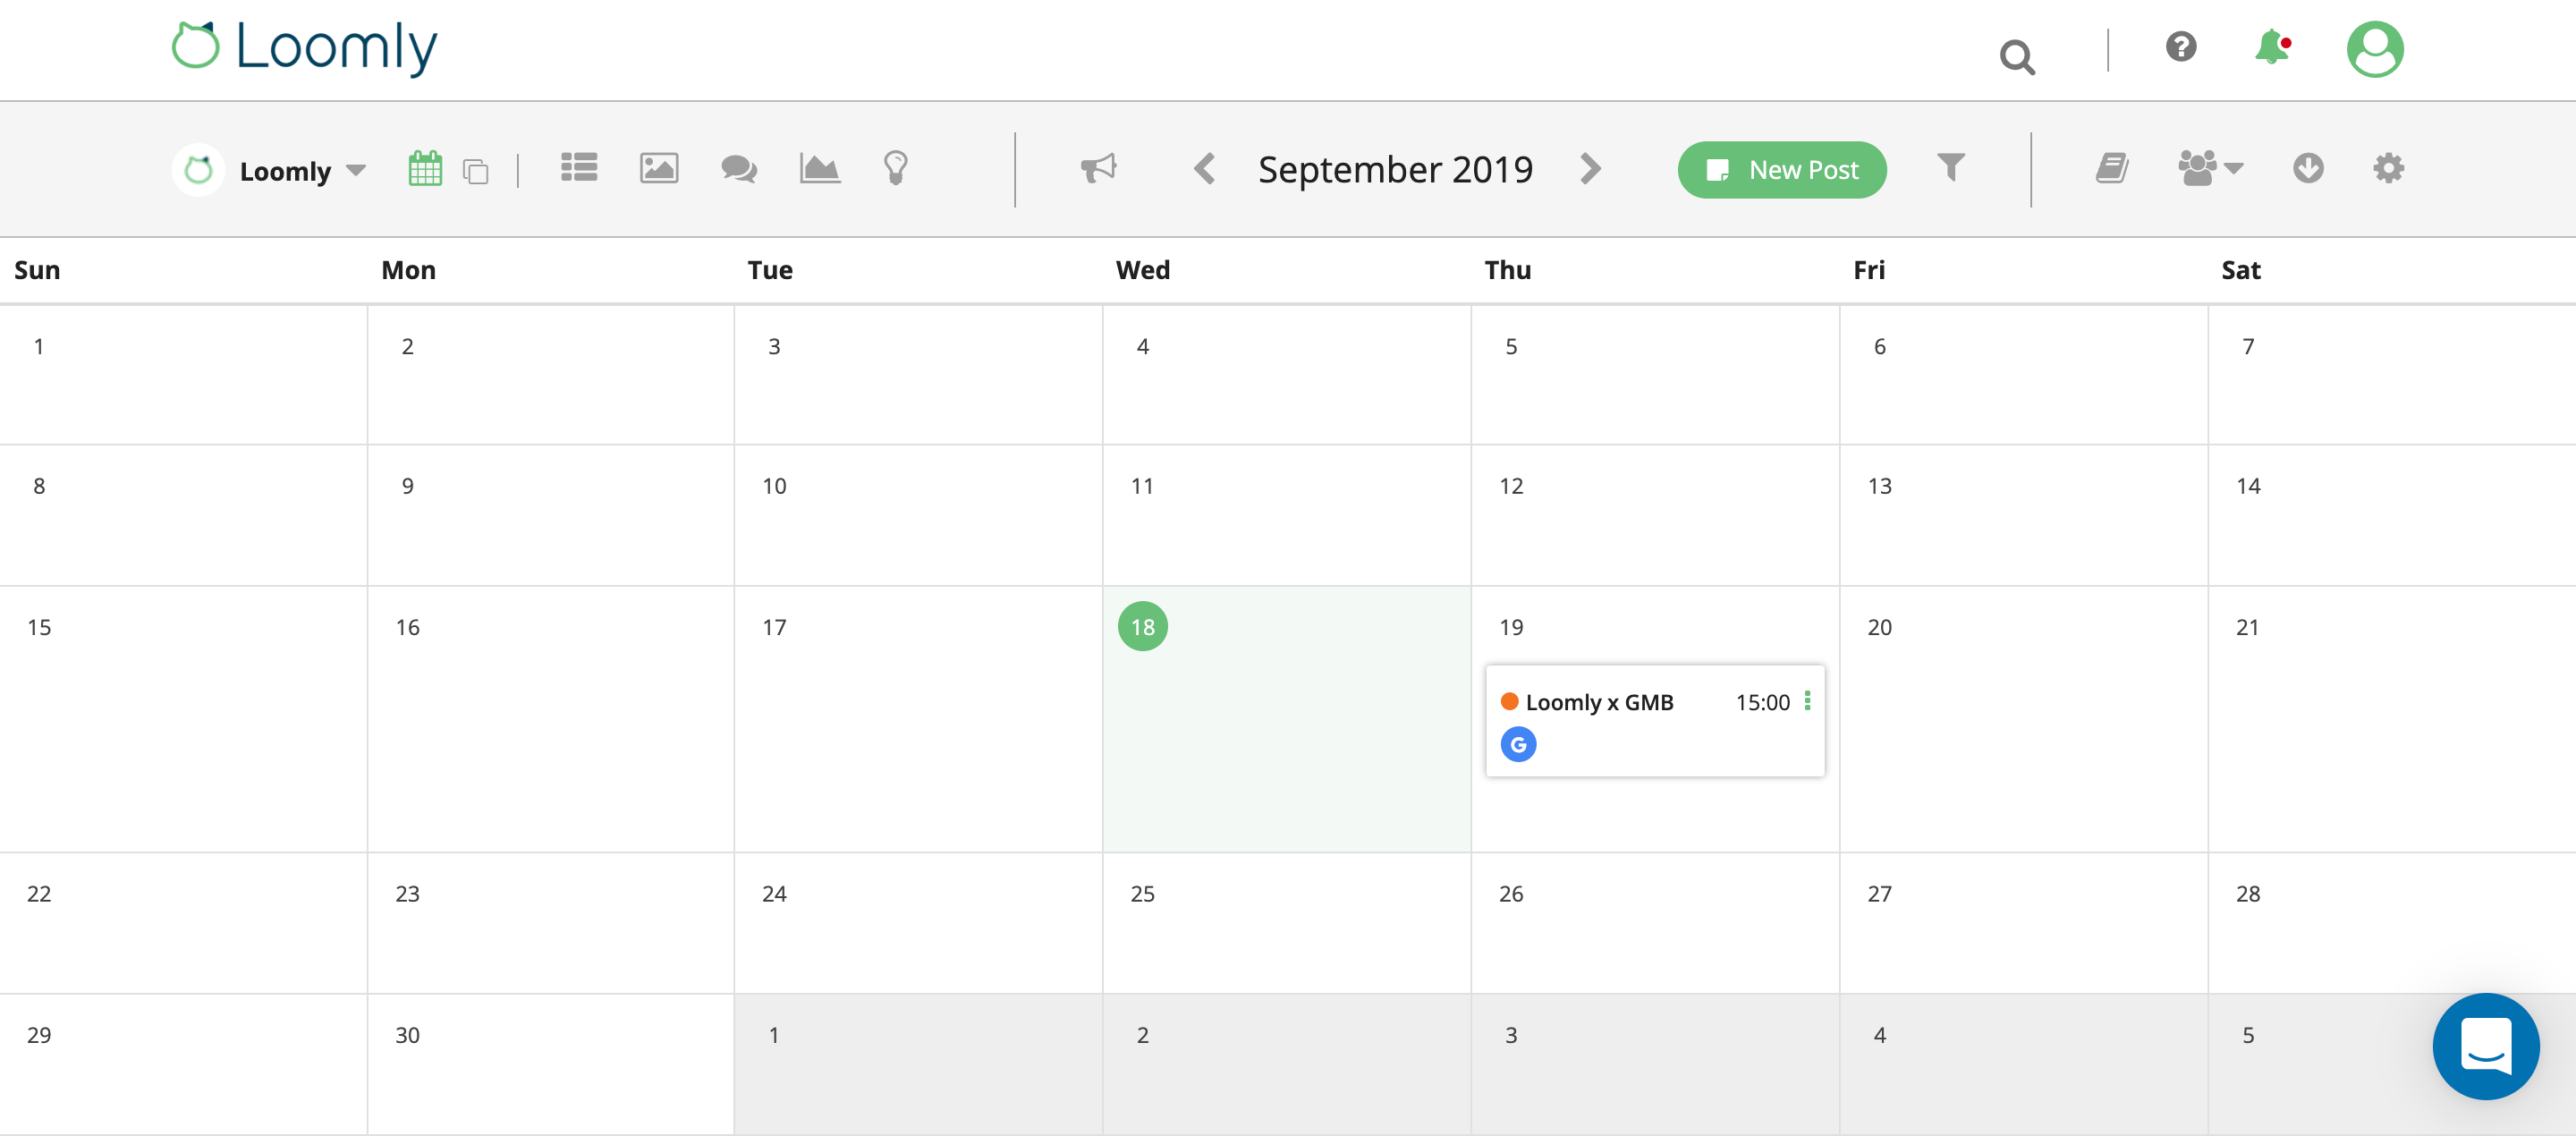 Loomly For Google My Business Calendar View